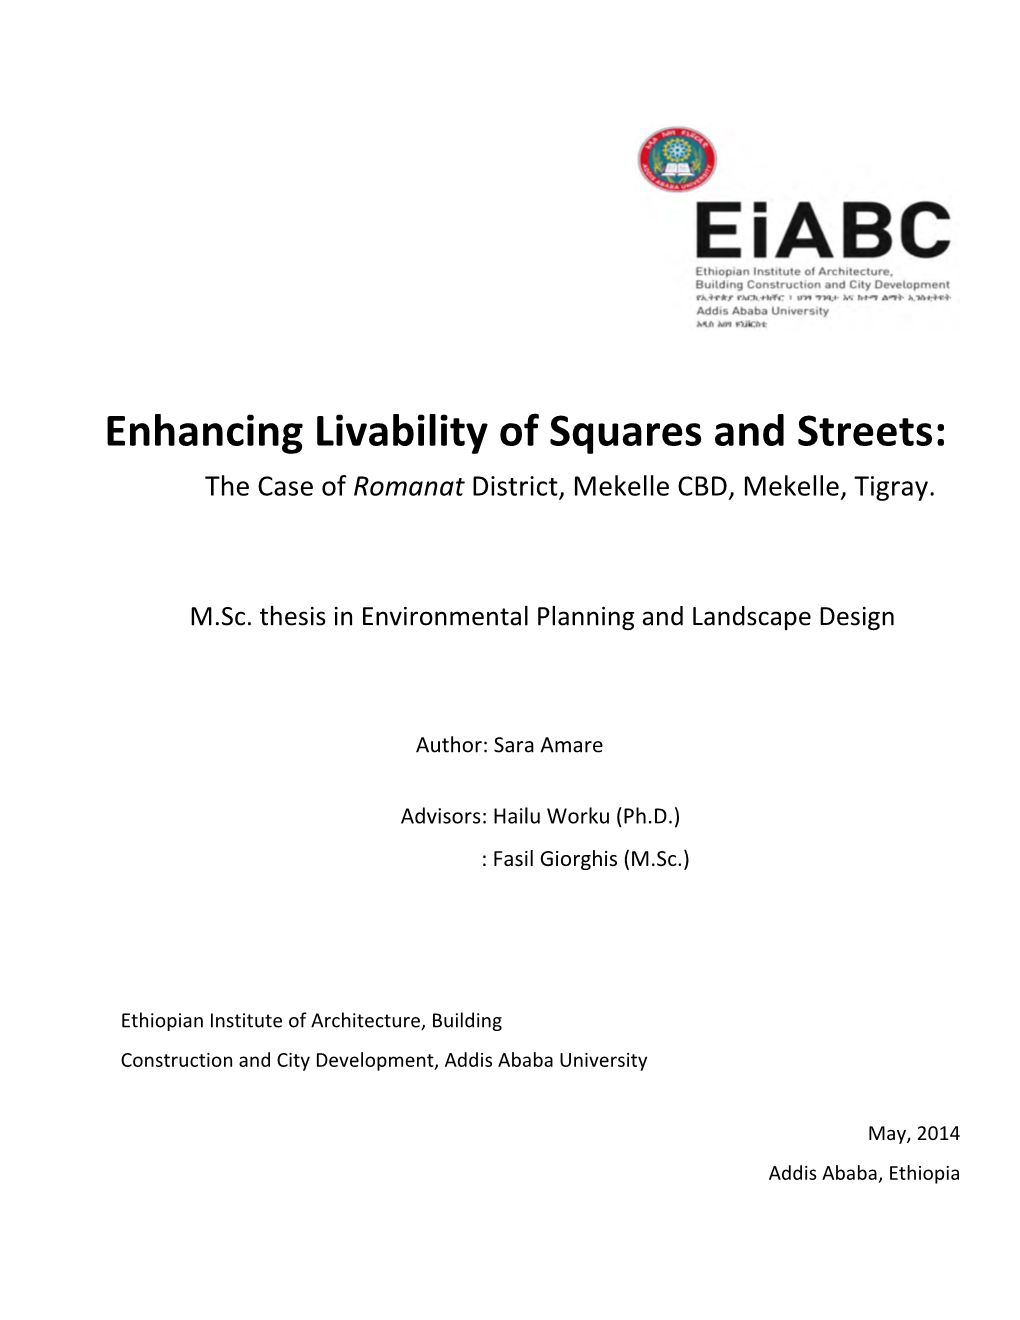 Enhancing Livability of Squares and Streets: the Case of Romanat District, Mekelle CBD, Mekelle, Tigray